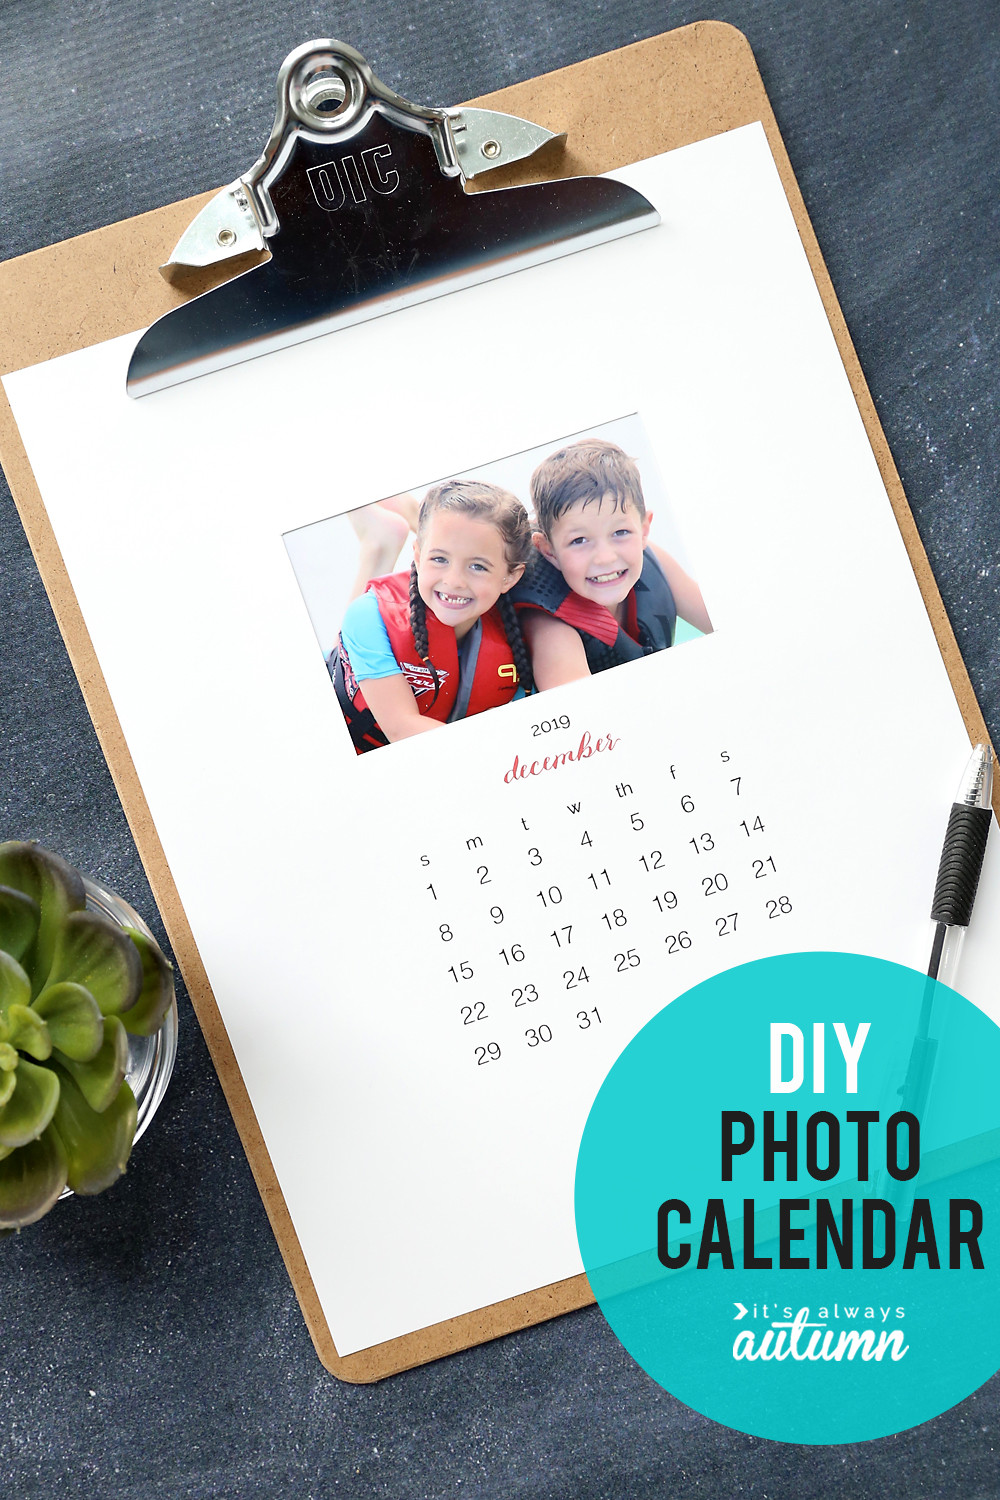 DIY Christmas Gifts 2019
 Make your own personalized calendar free printable 2019